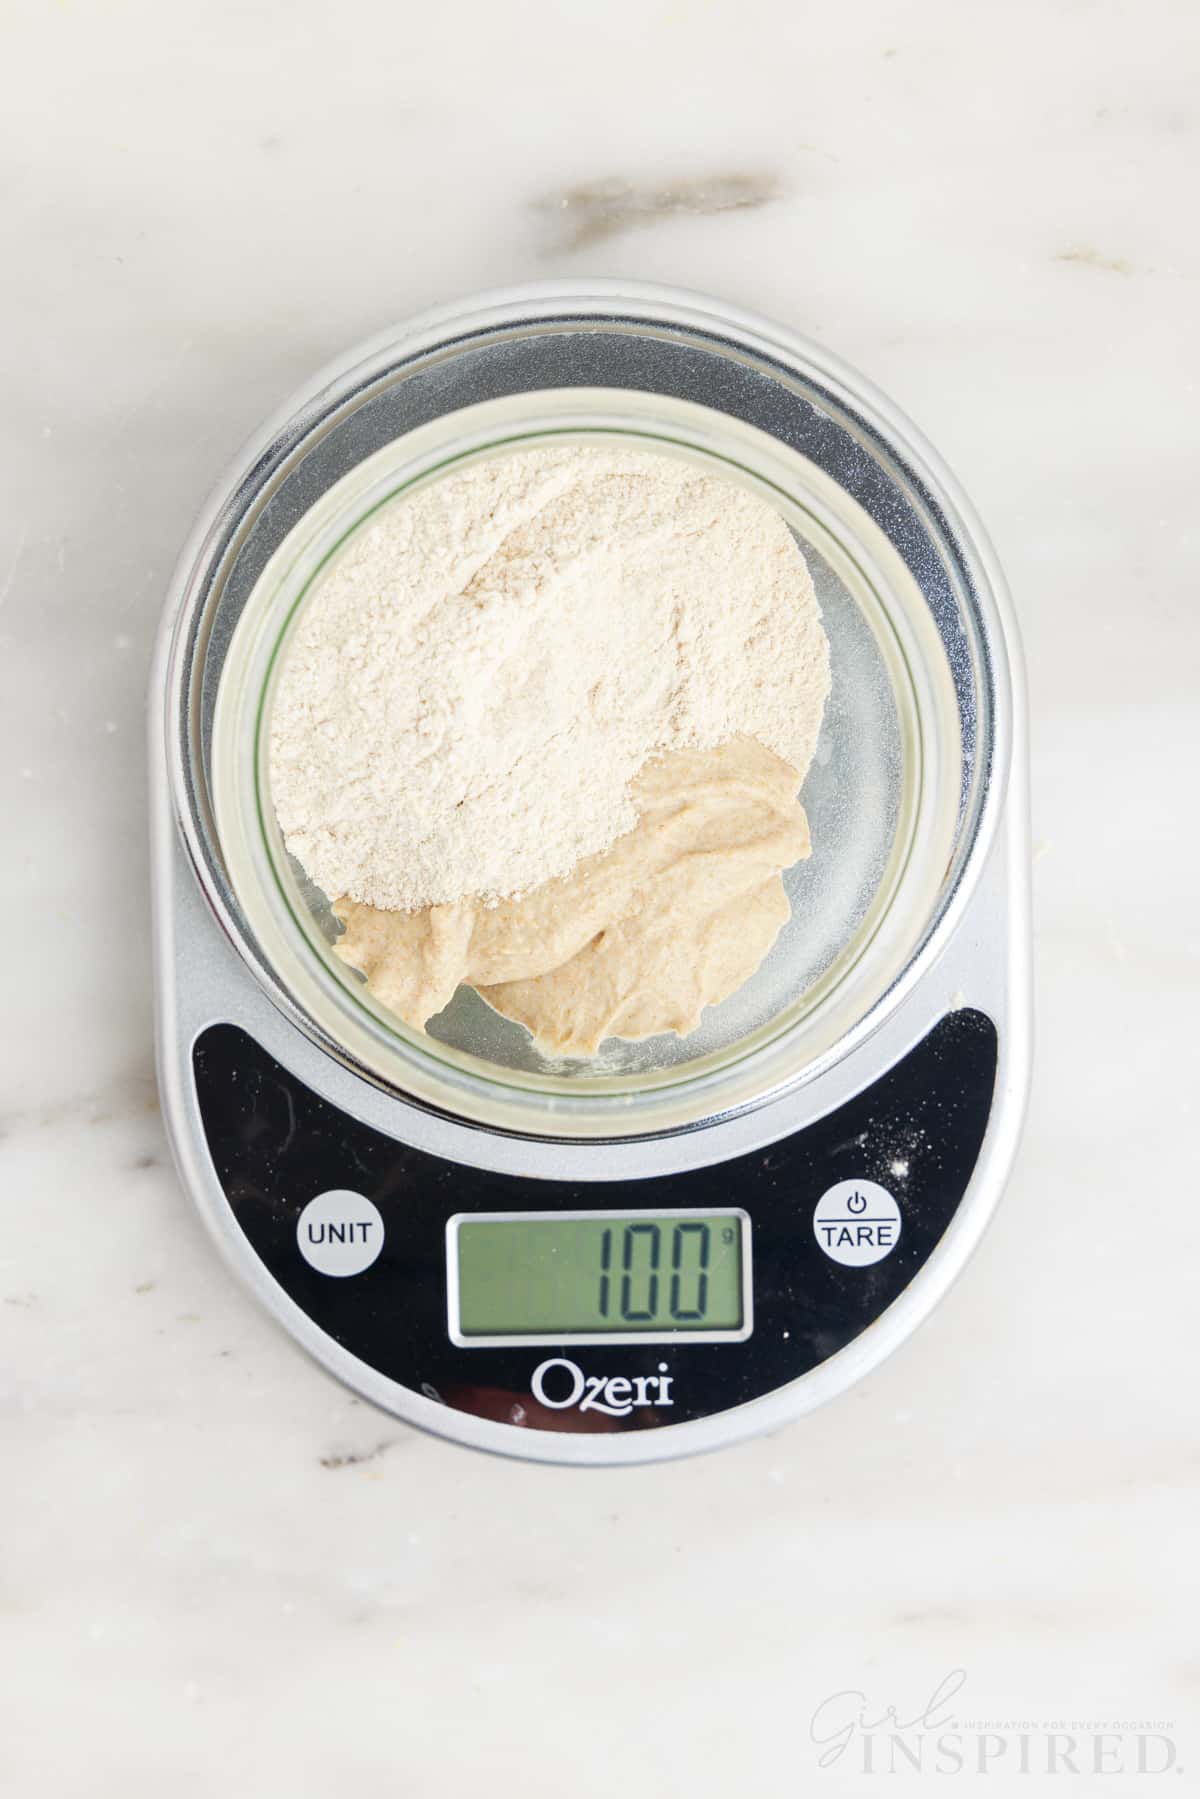 flour and sourdough starter mixture in a clean glass container on a scale that reads 100 grams.